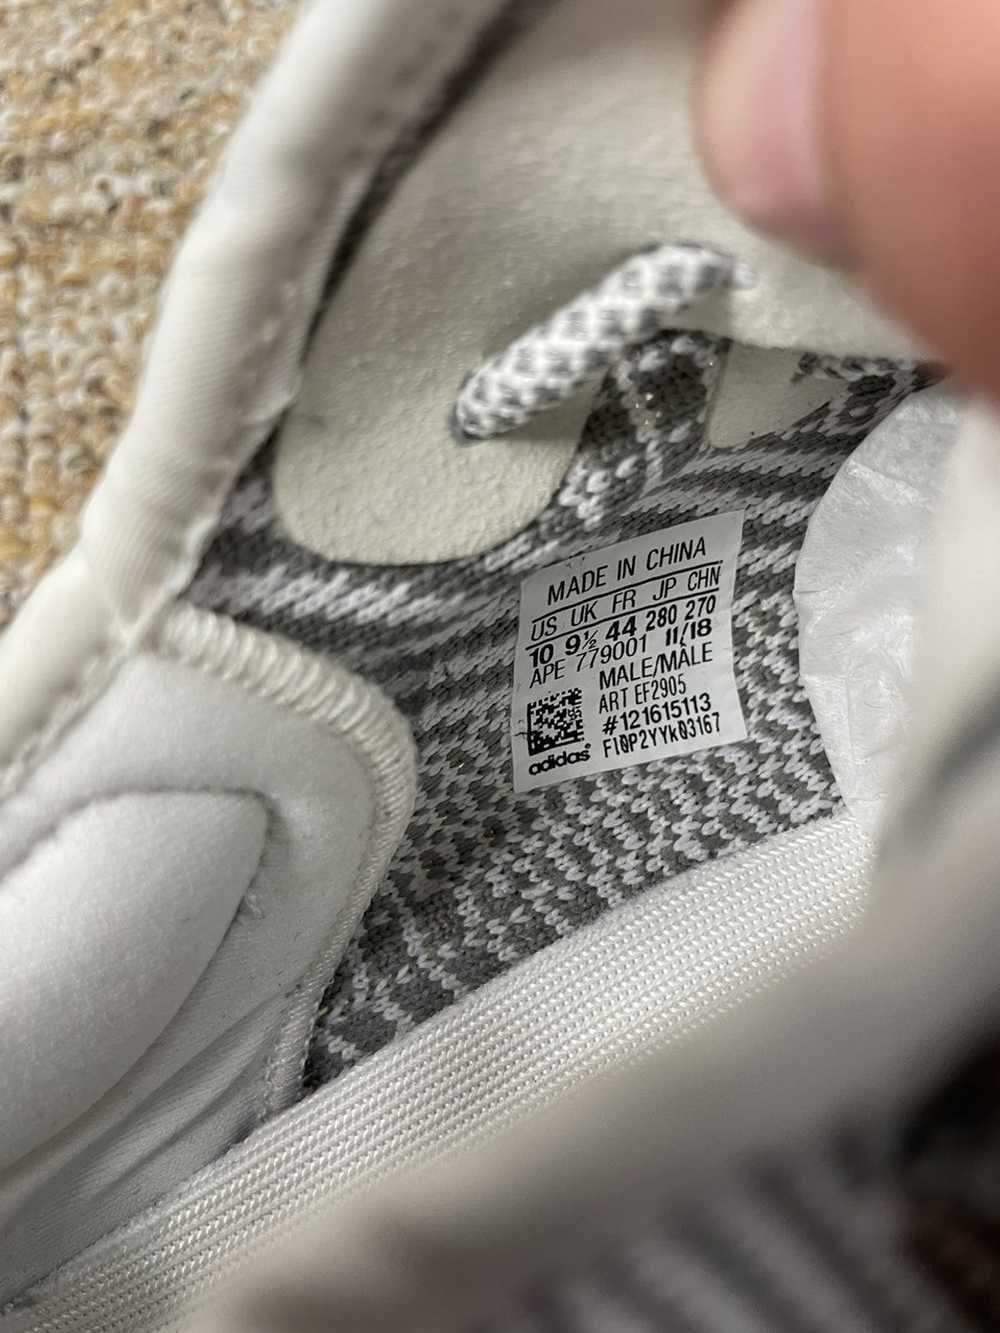 Adidas Yeezy Boost 350 V2 Static Non Reflective - image 7